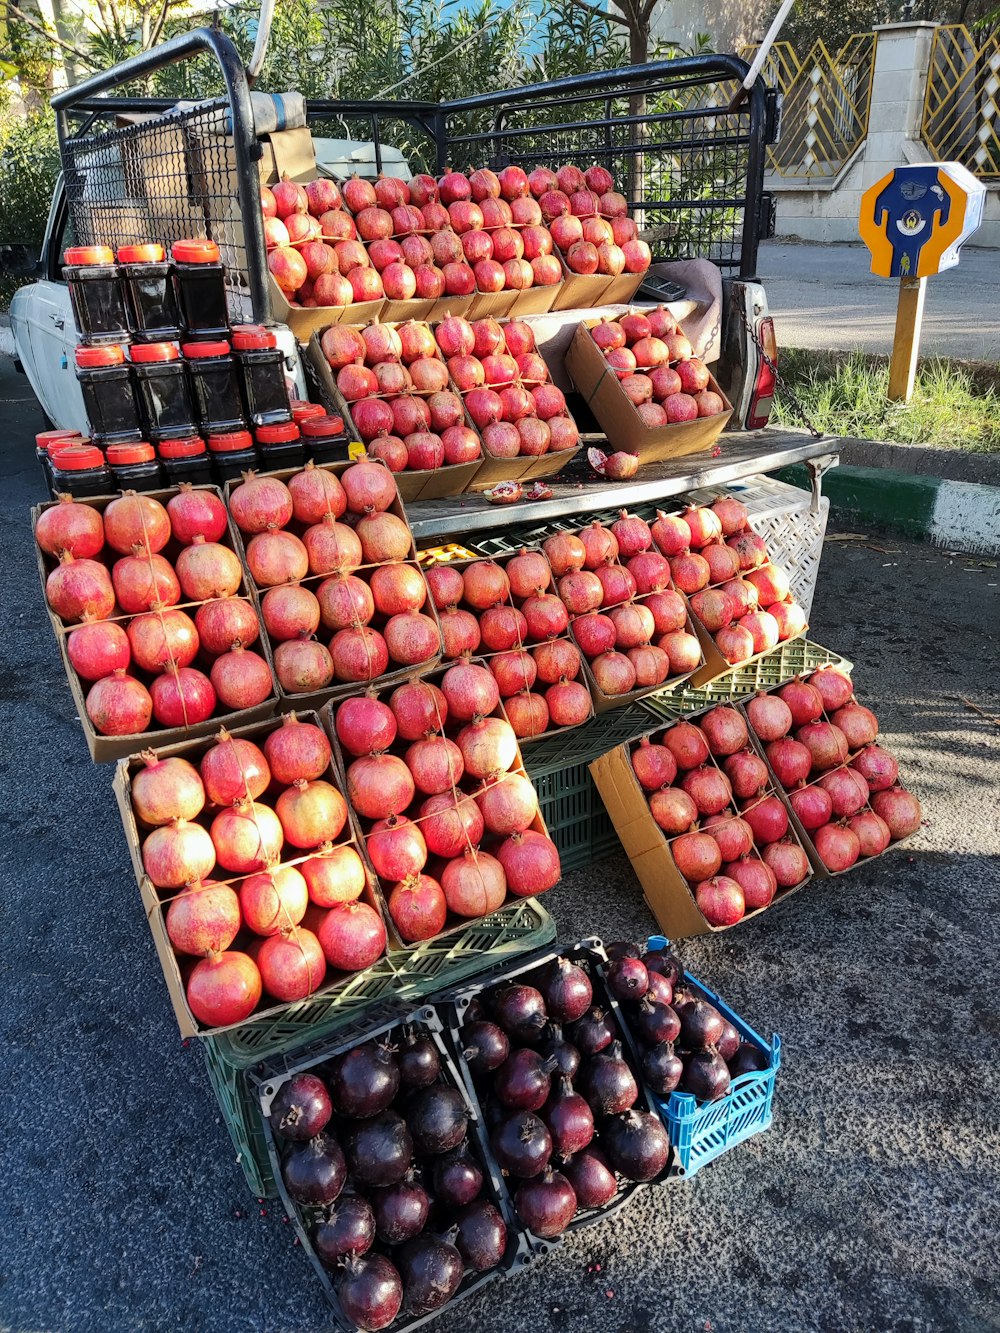 a display of apples and plums for sale